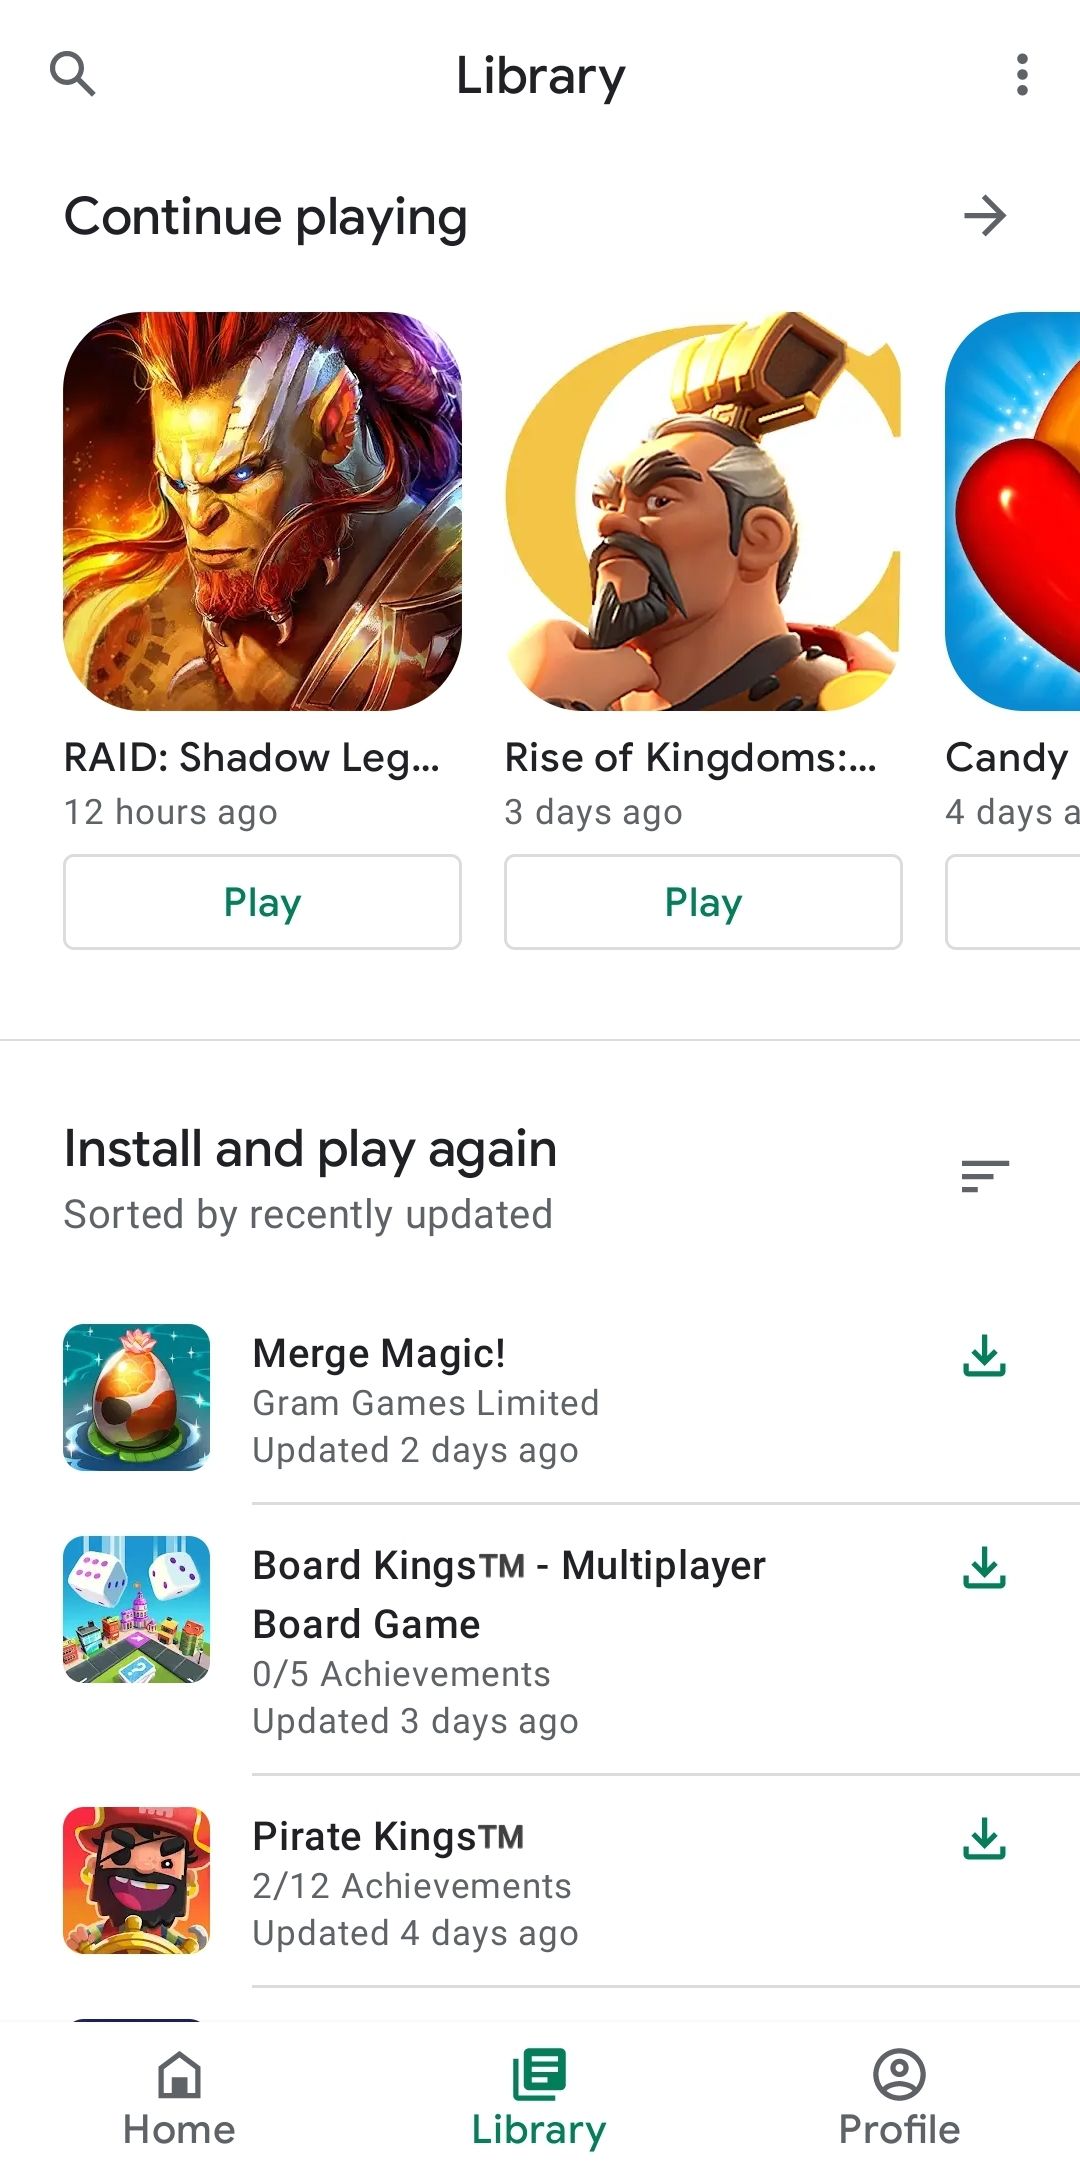 the library screen of Google play games